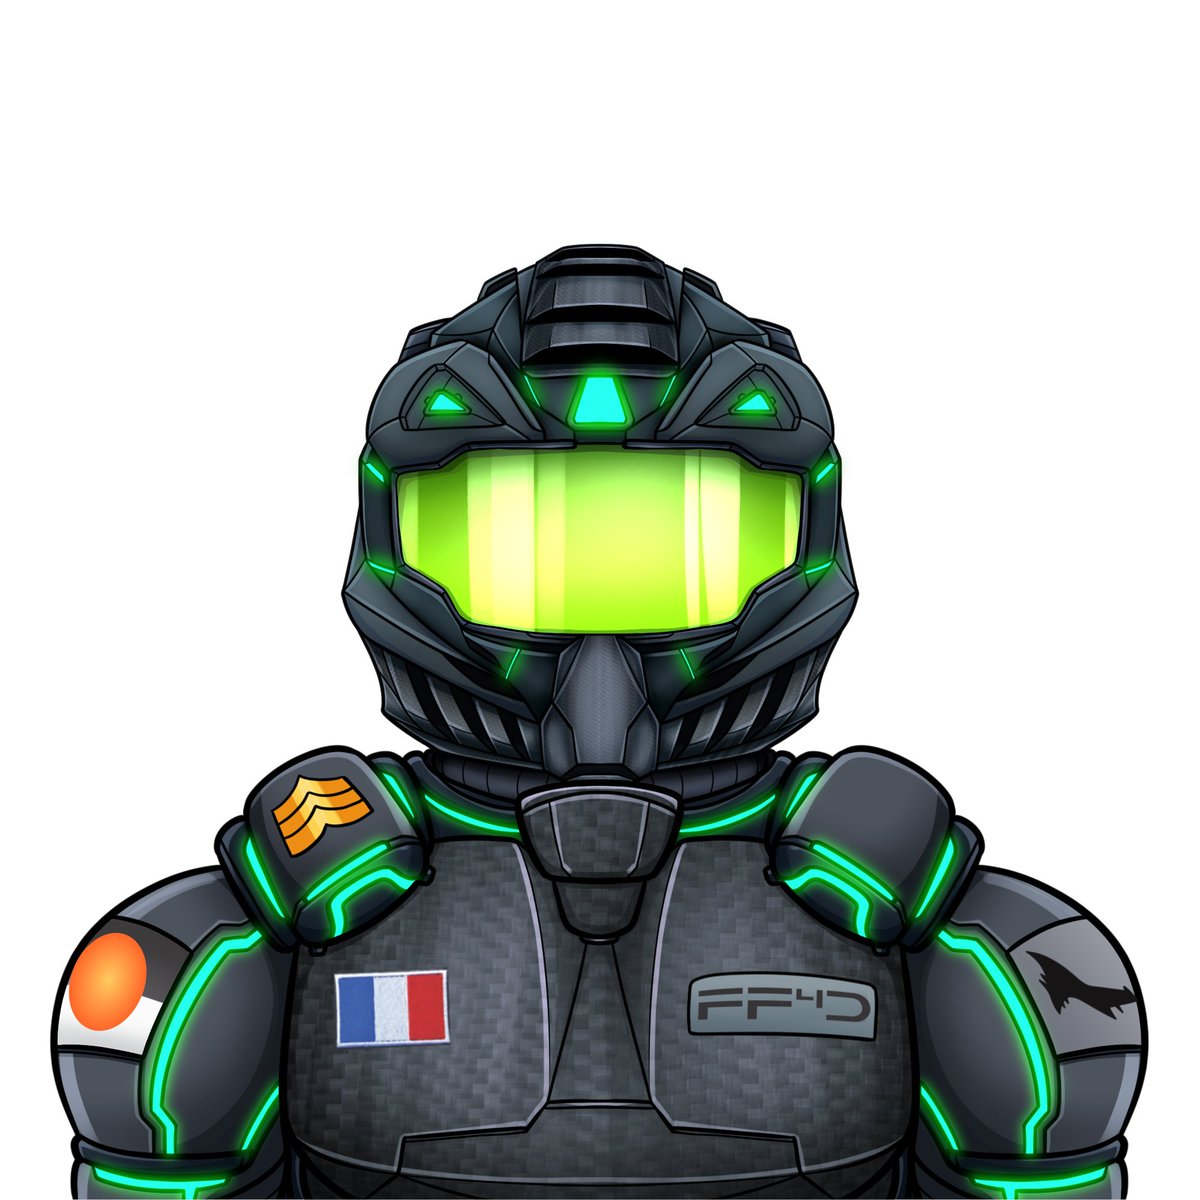 If you haven't had a chance to see this sneak peek in the discord check out the new V2 helmet! 👀

This epic new helmet will be launched in our next defender character collection! Let us know what you think in the comments below ⬇️

#NFTs #Ethereum #Crypto #NFT #P2E #Play2Earn